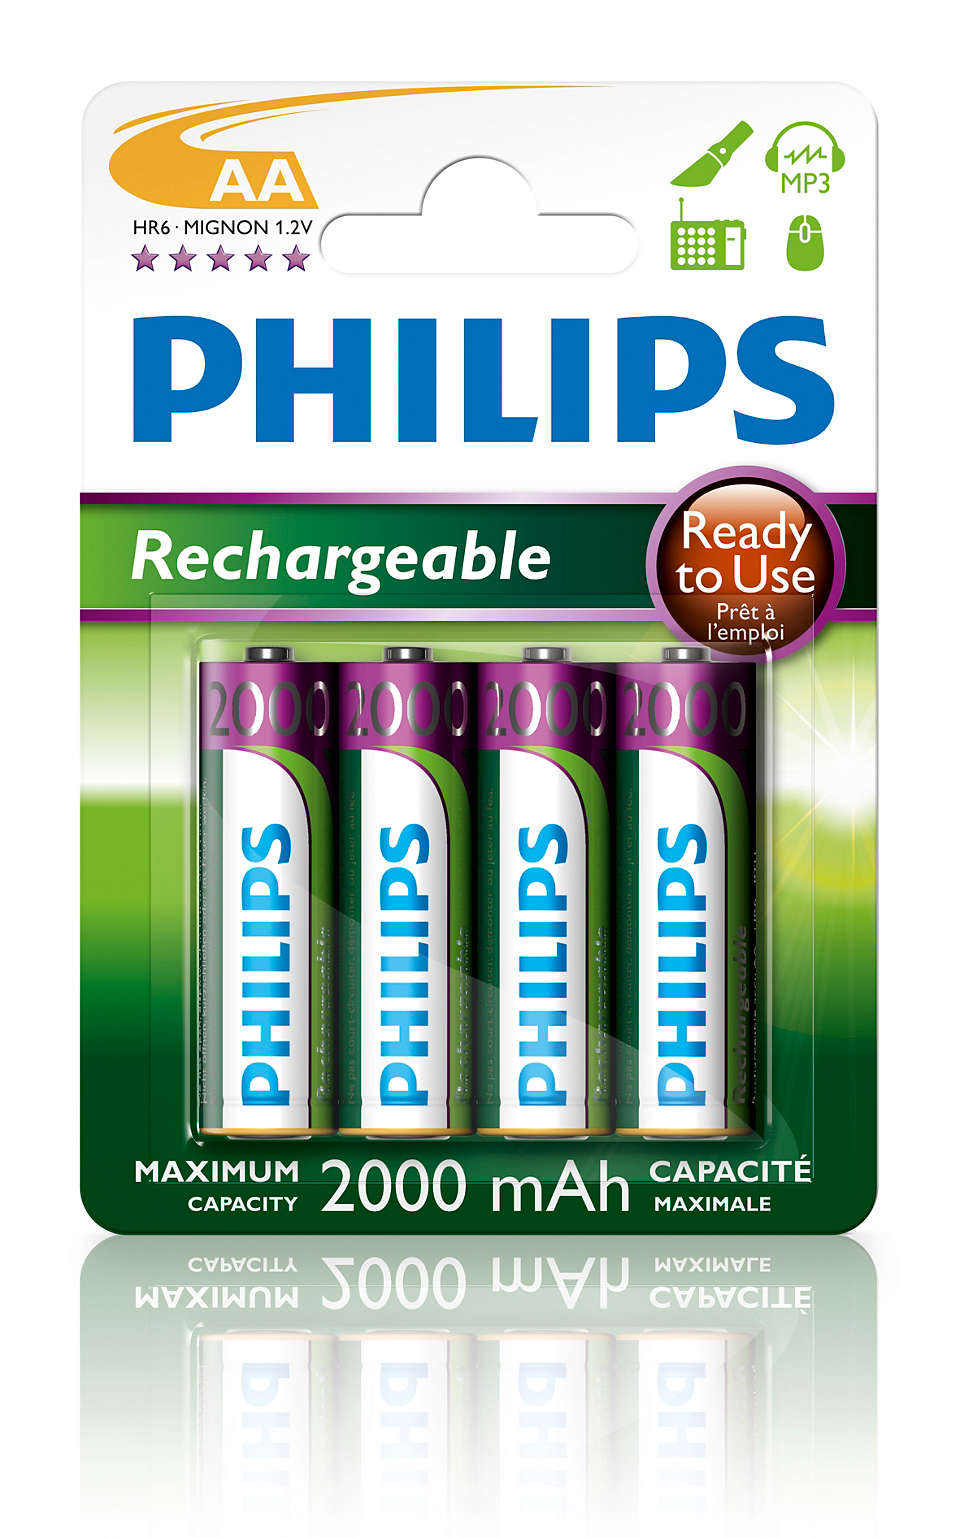 Ready to Use Rechargeable batteries